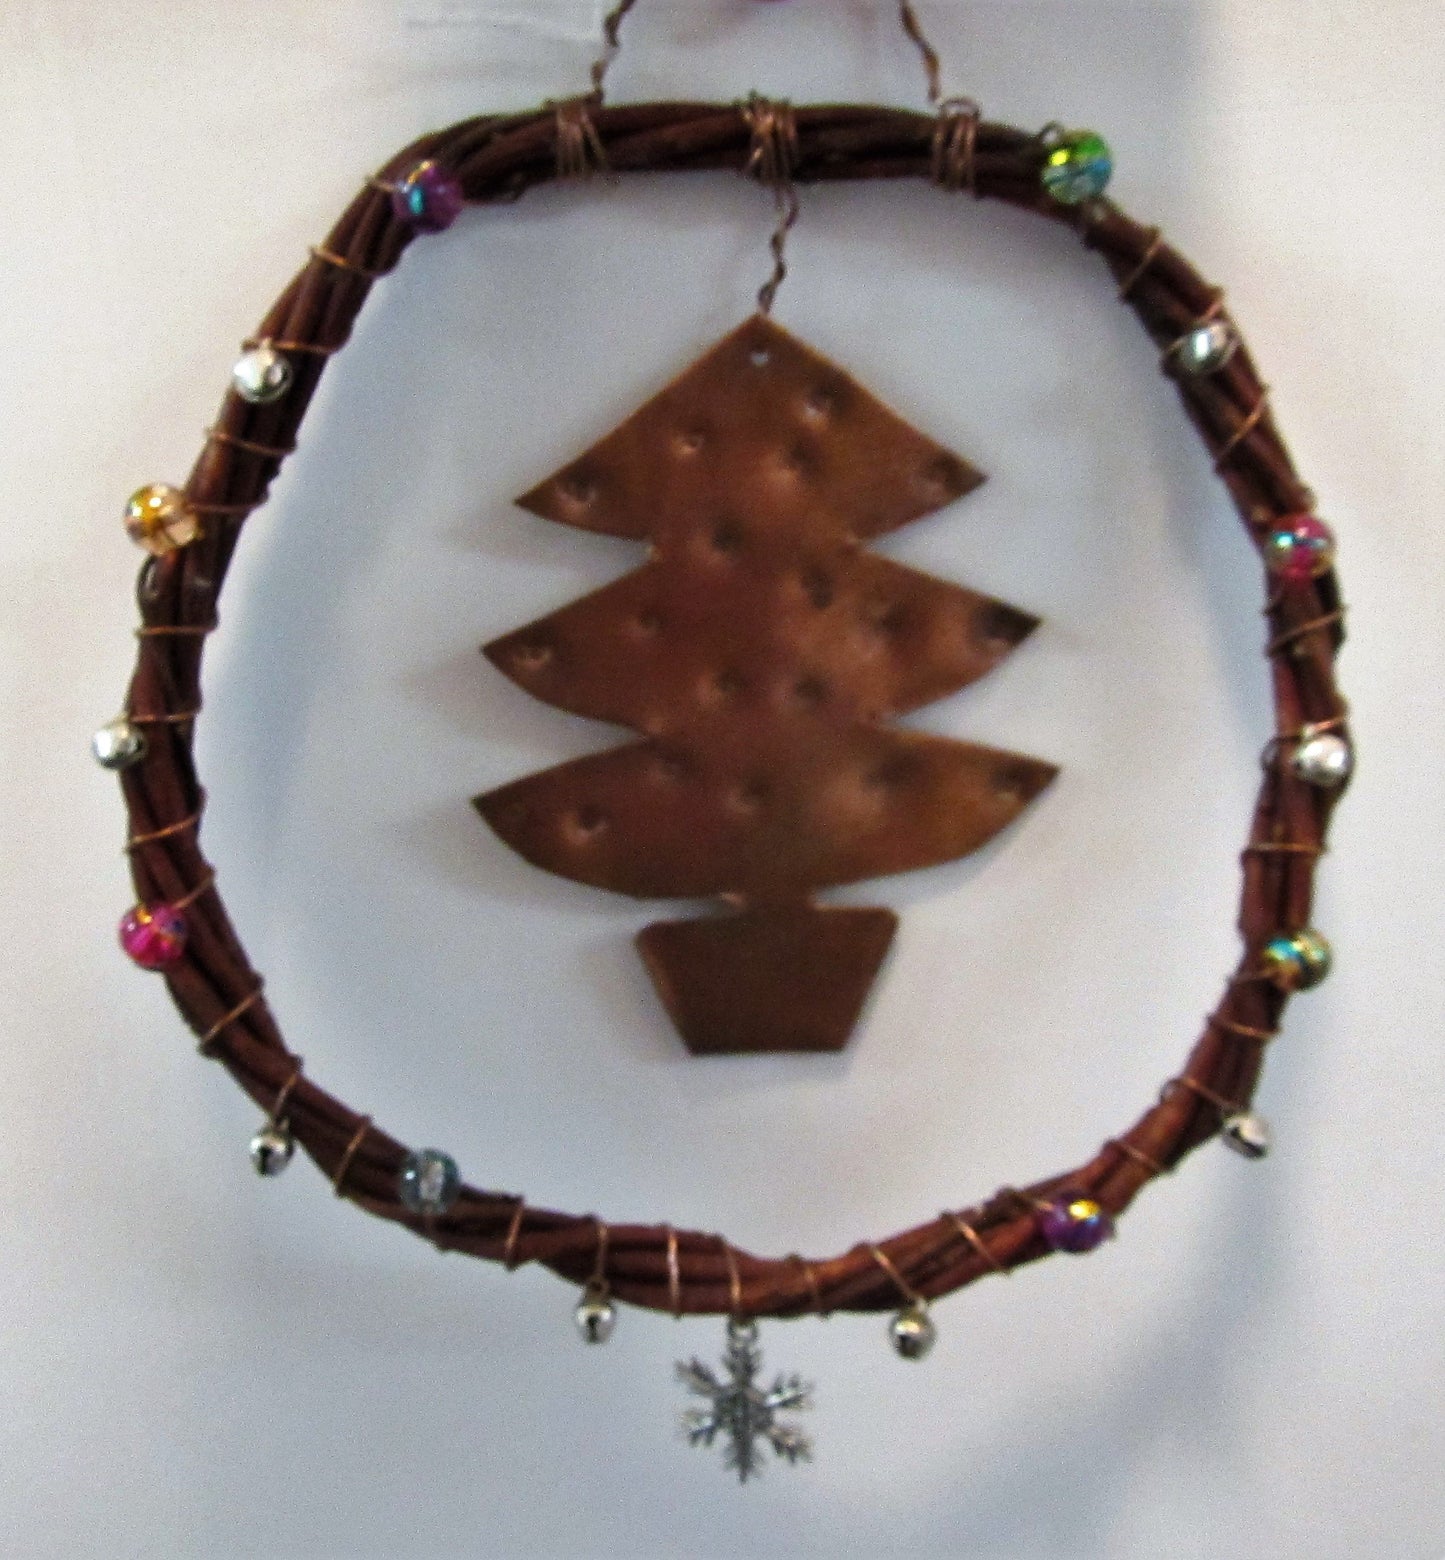 Handcrafted Christmas tree dream catcher